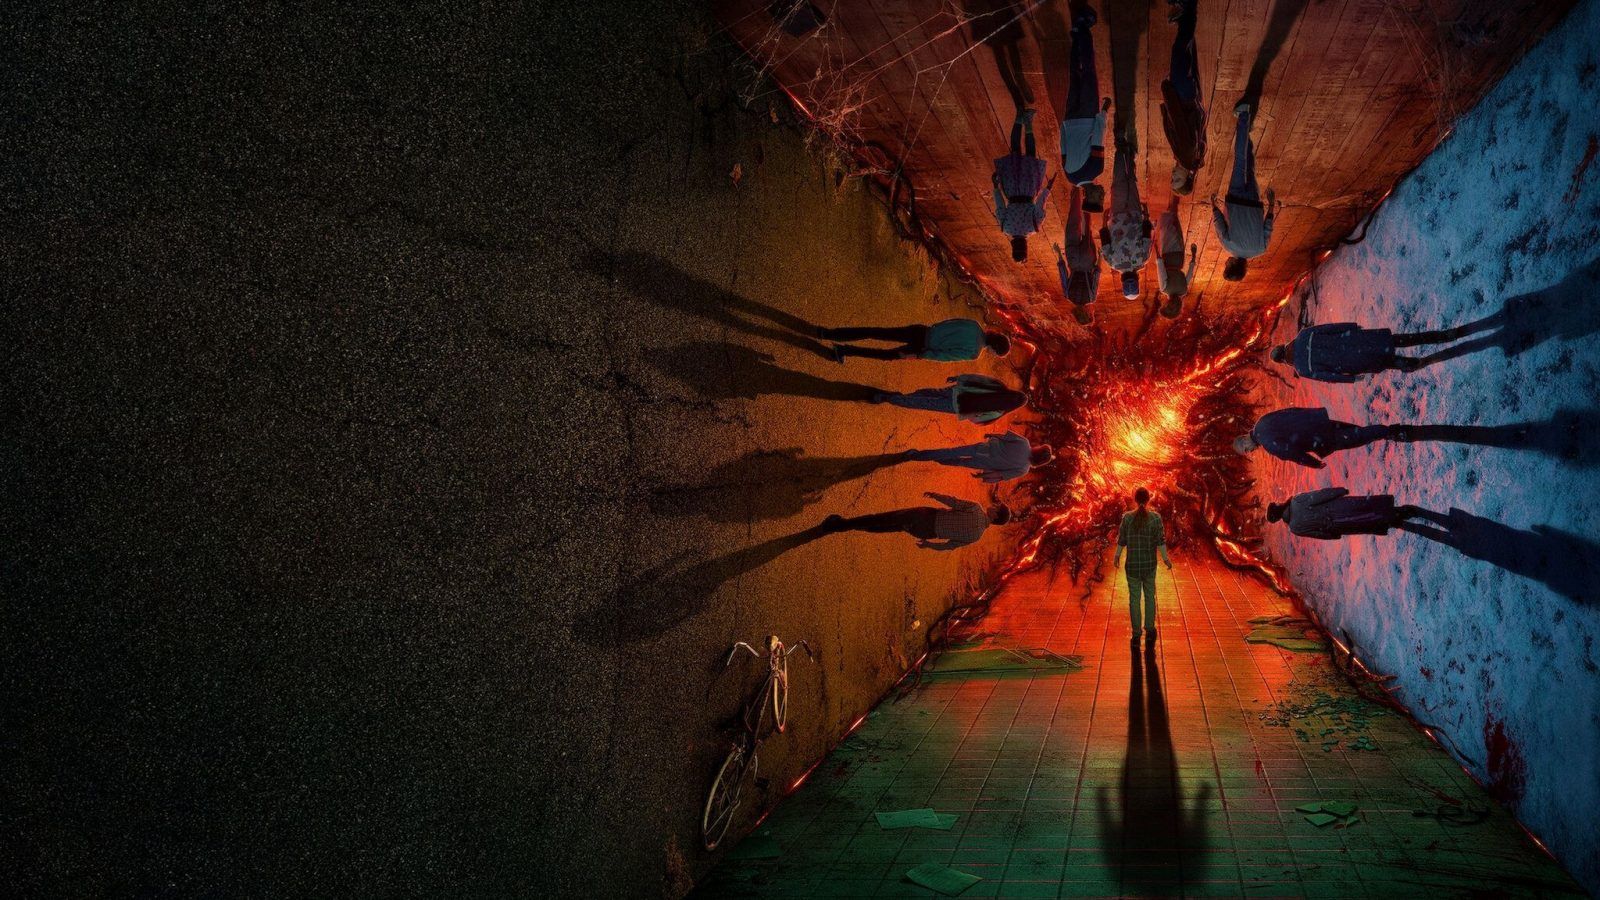 Unpacking the Stranger Things 4 Volume 2 trailer: The epic conclusion